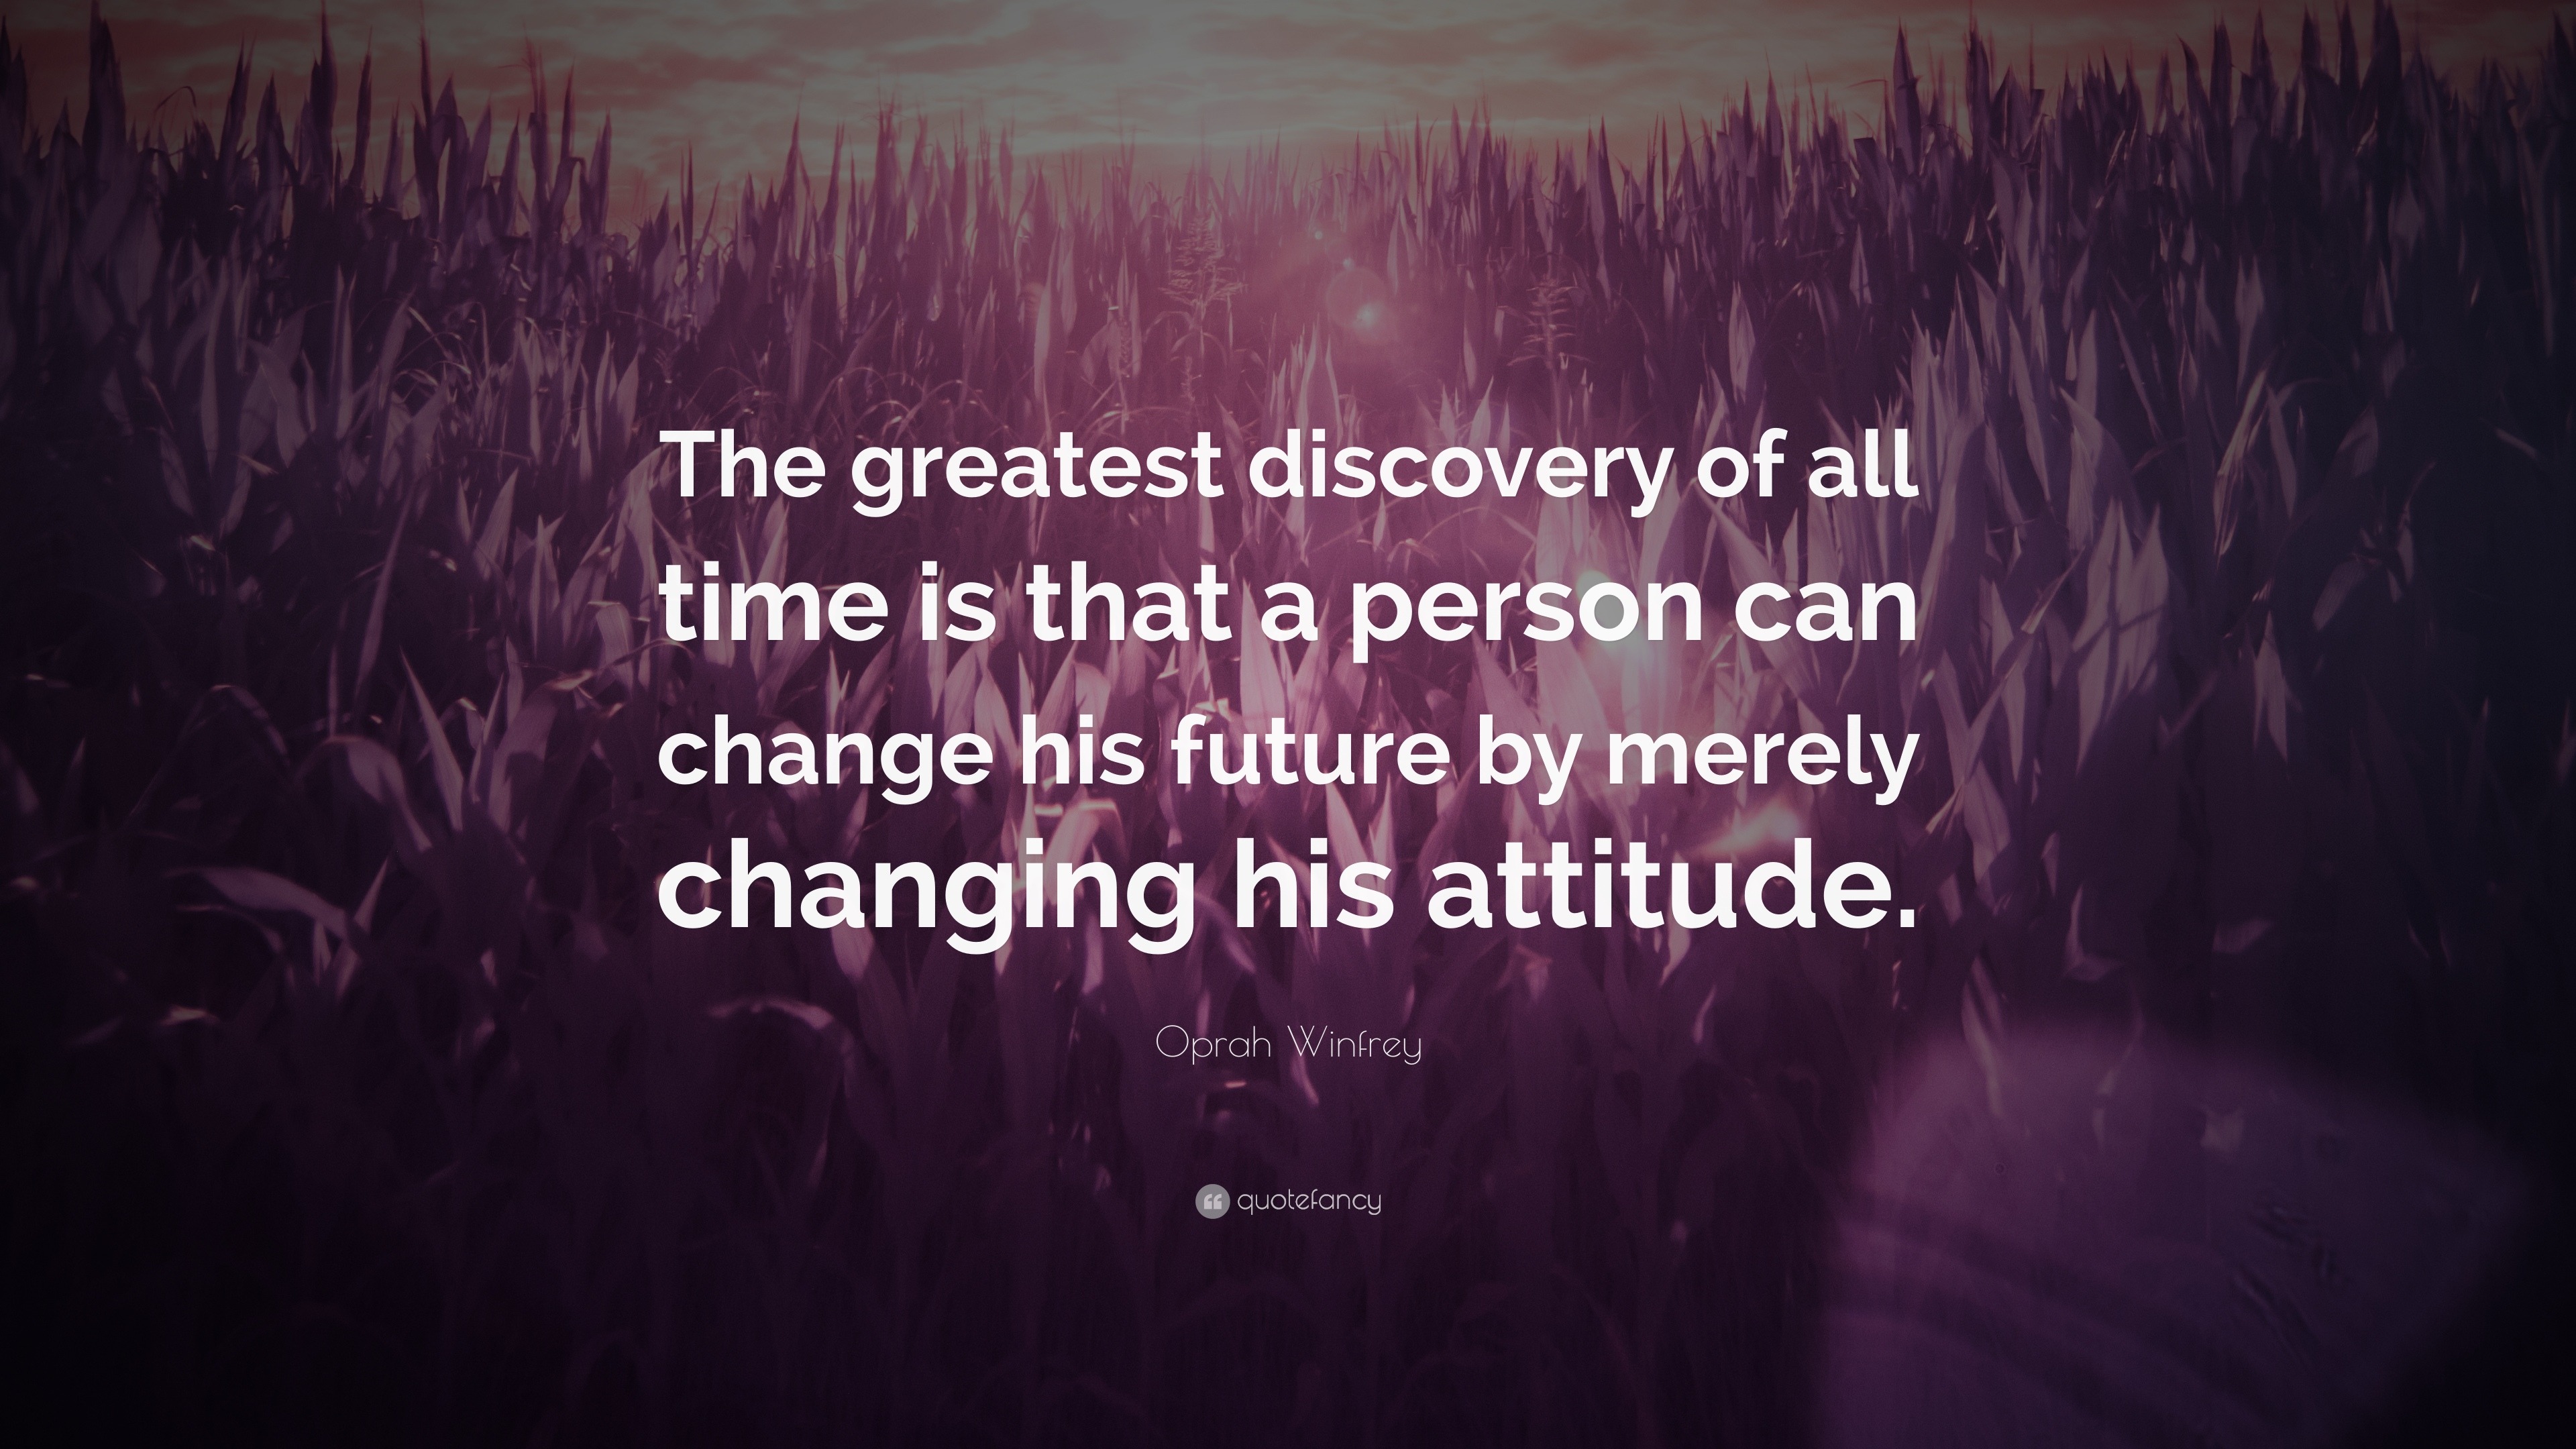 Oprah Winfrey Quote: “The greatest discovery of all time is that a